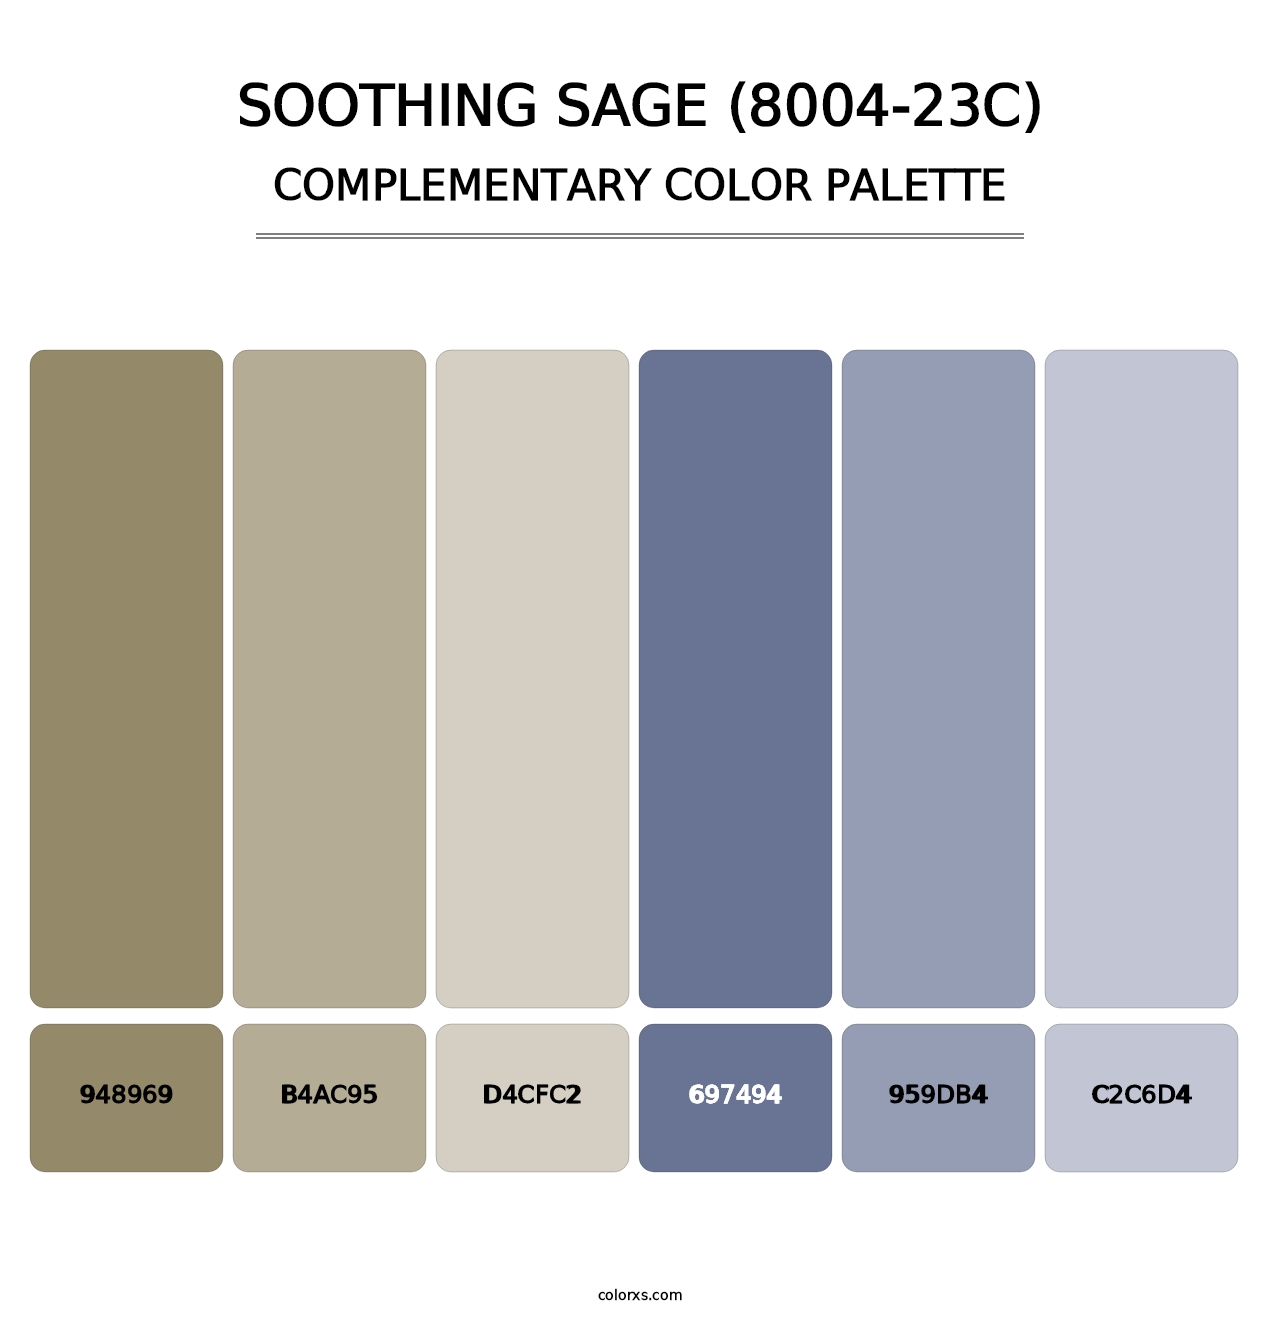 Soothing Sage (8004-23C) - Complementary Color Palette